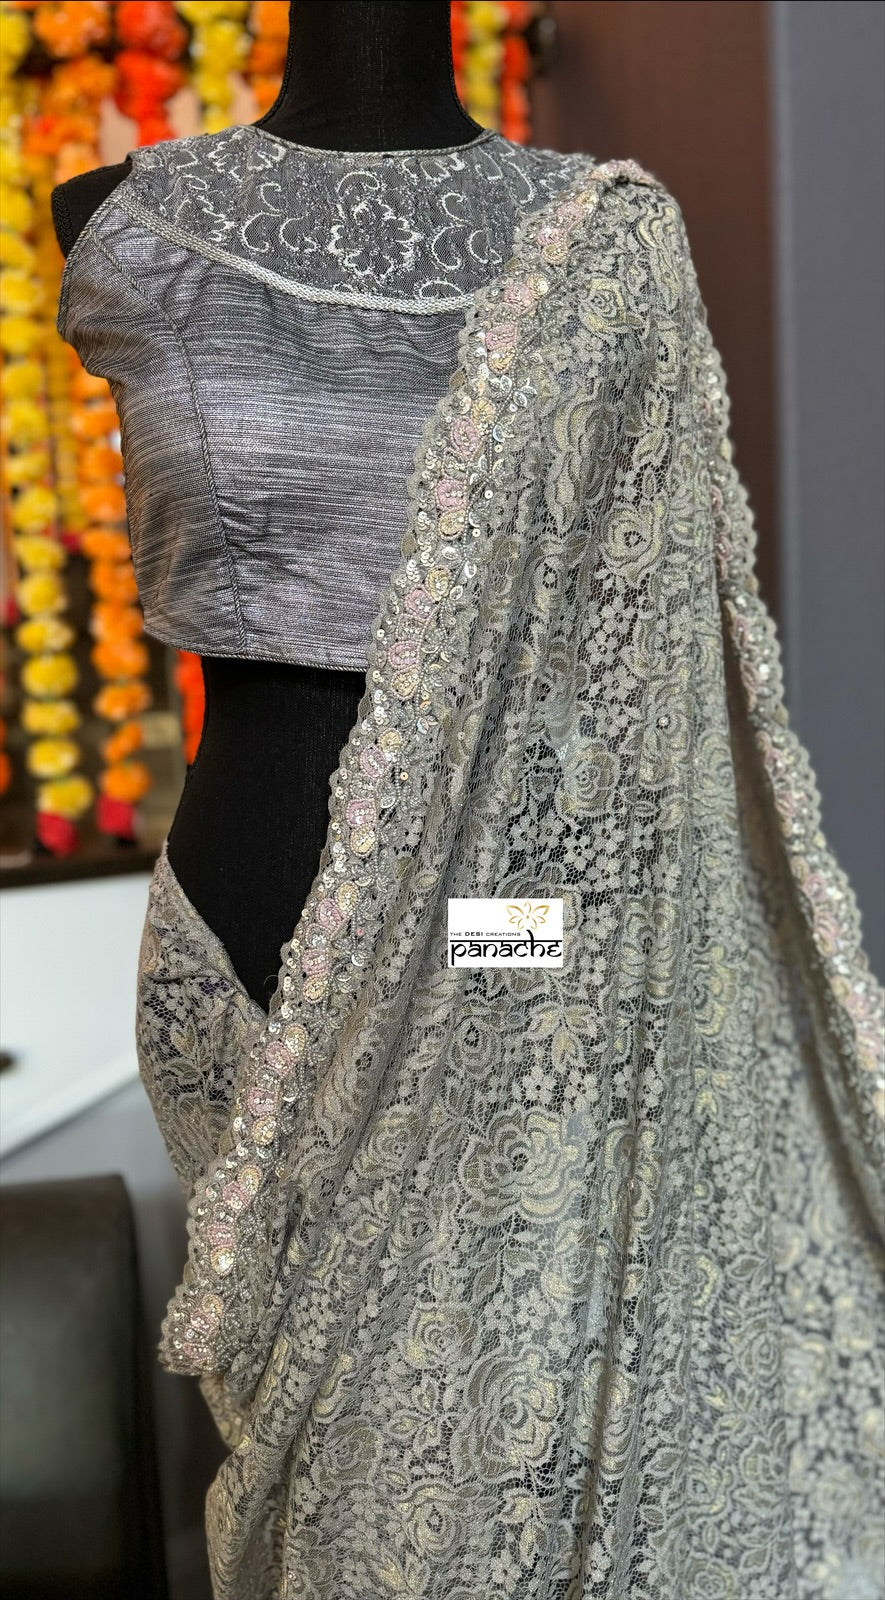 Designer Chantily Lace Saree - Grey Hand Embroidered